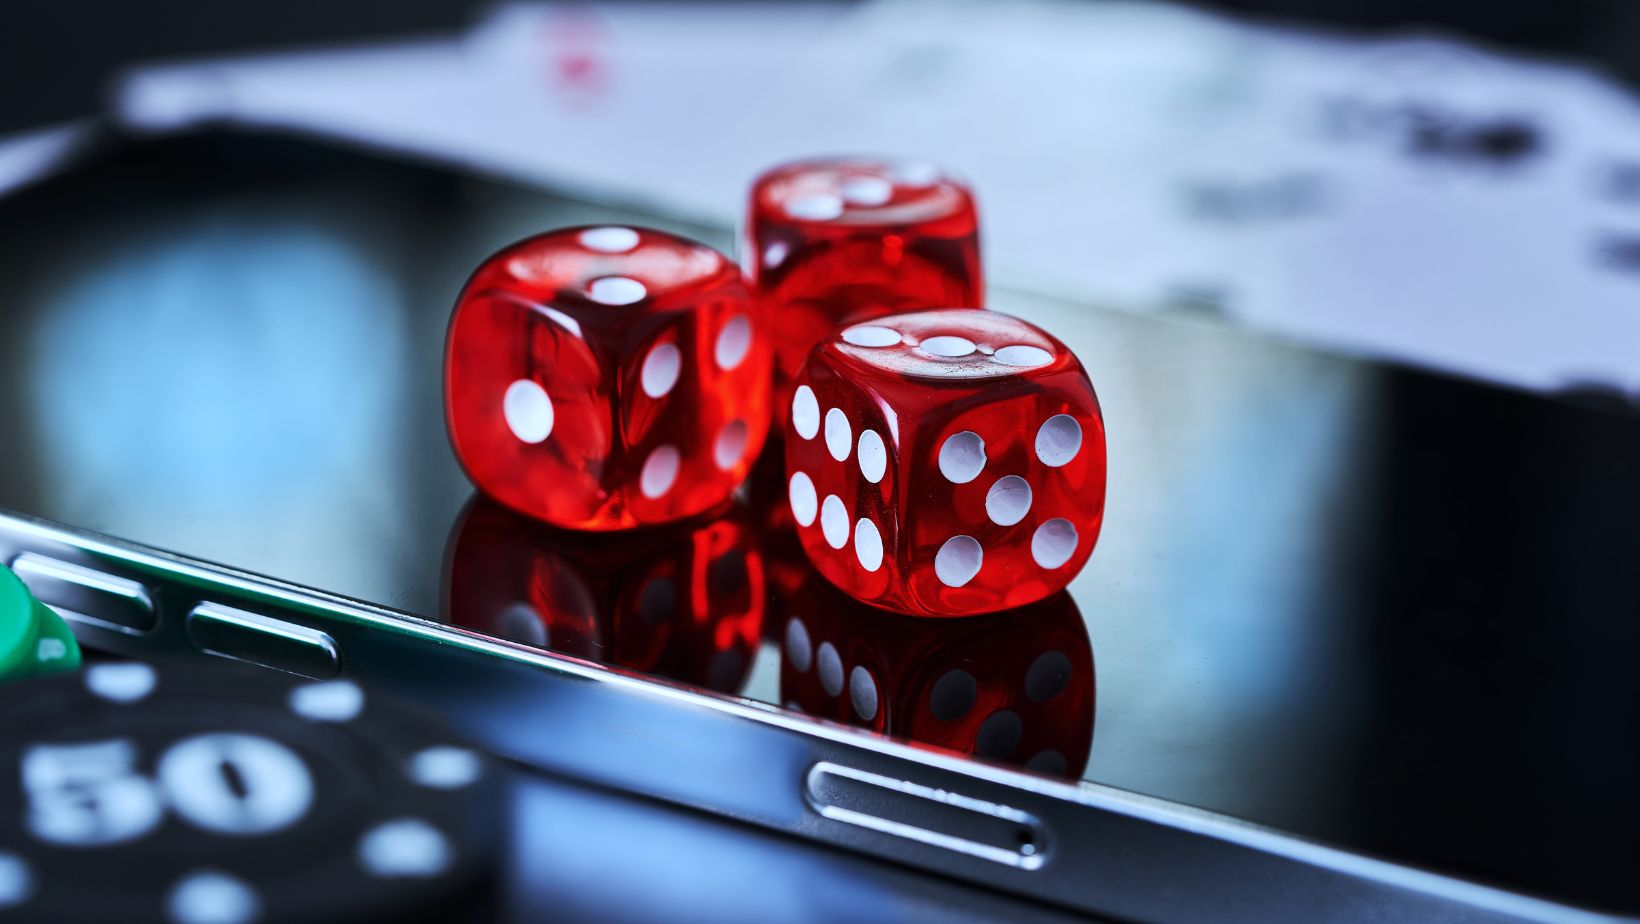 Why Are Online Casinos Getting More Popular in New Zealand?